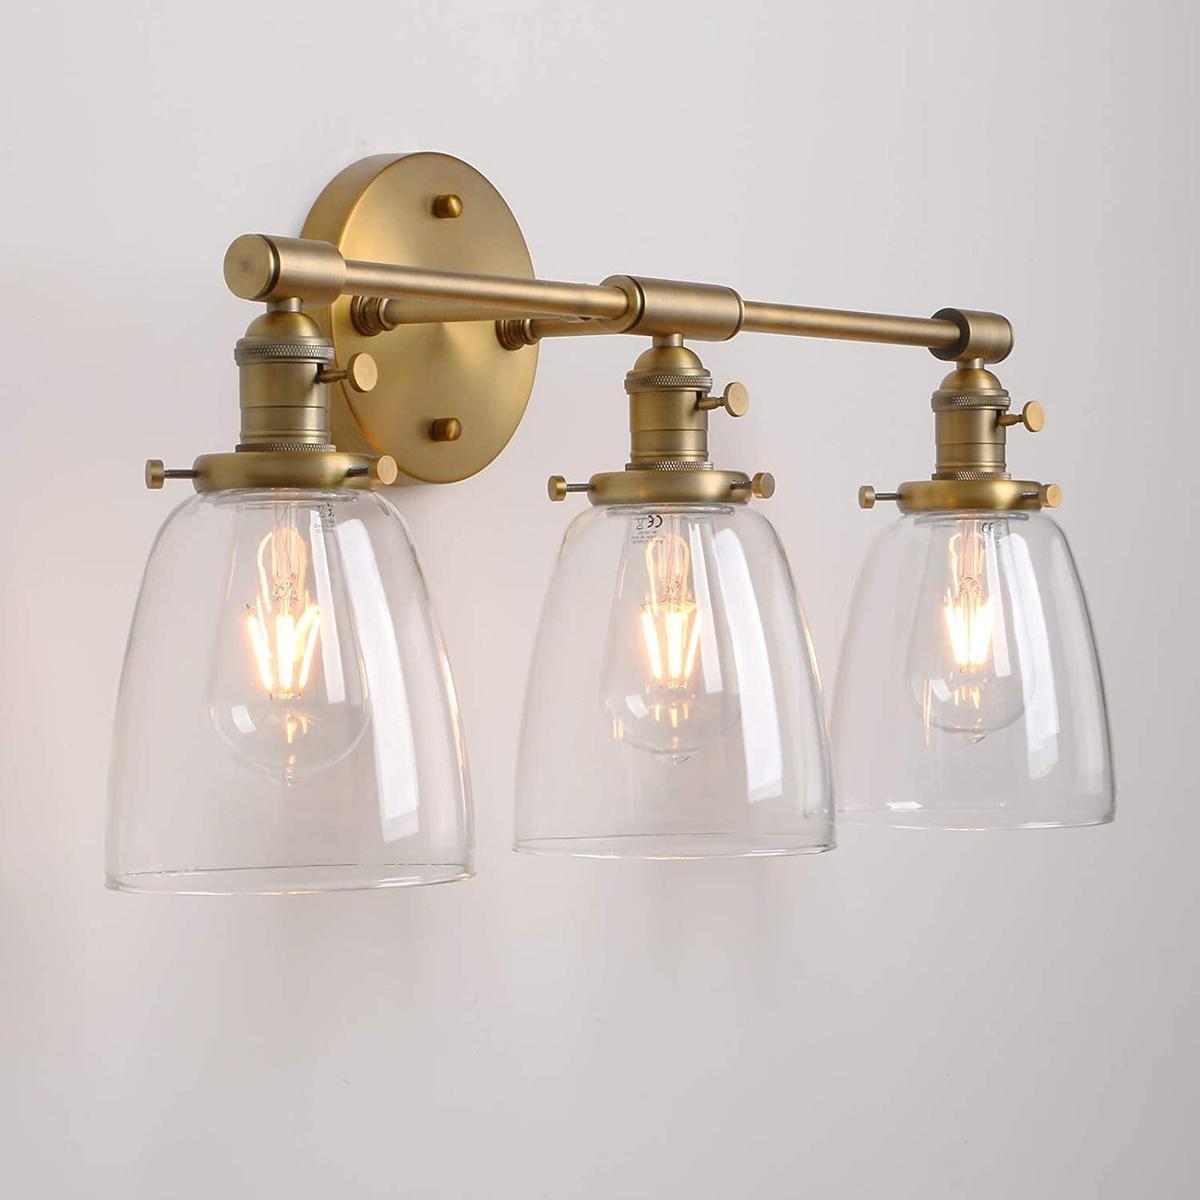 Permo Vintage Industrial Antique Three-Light Wall Sconces w/Oval Cone Clear Glass Shade $169.99 MSRP